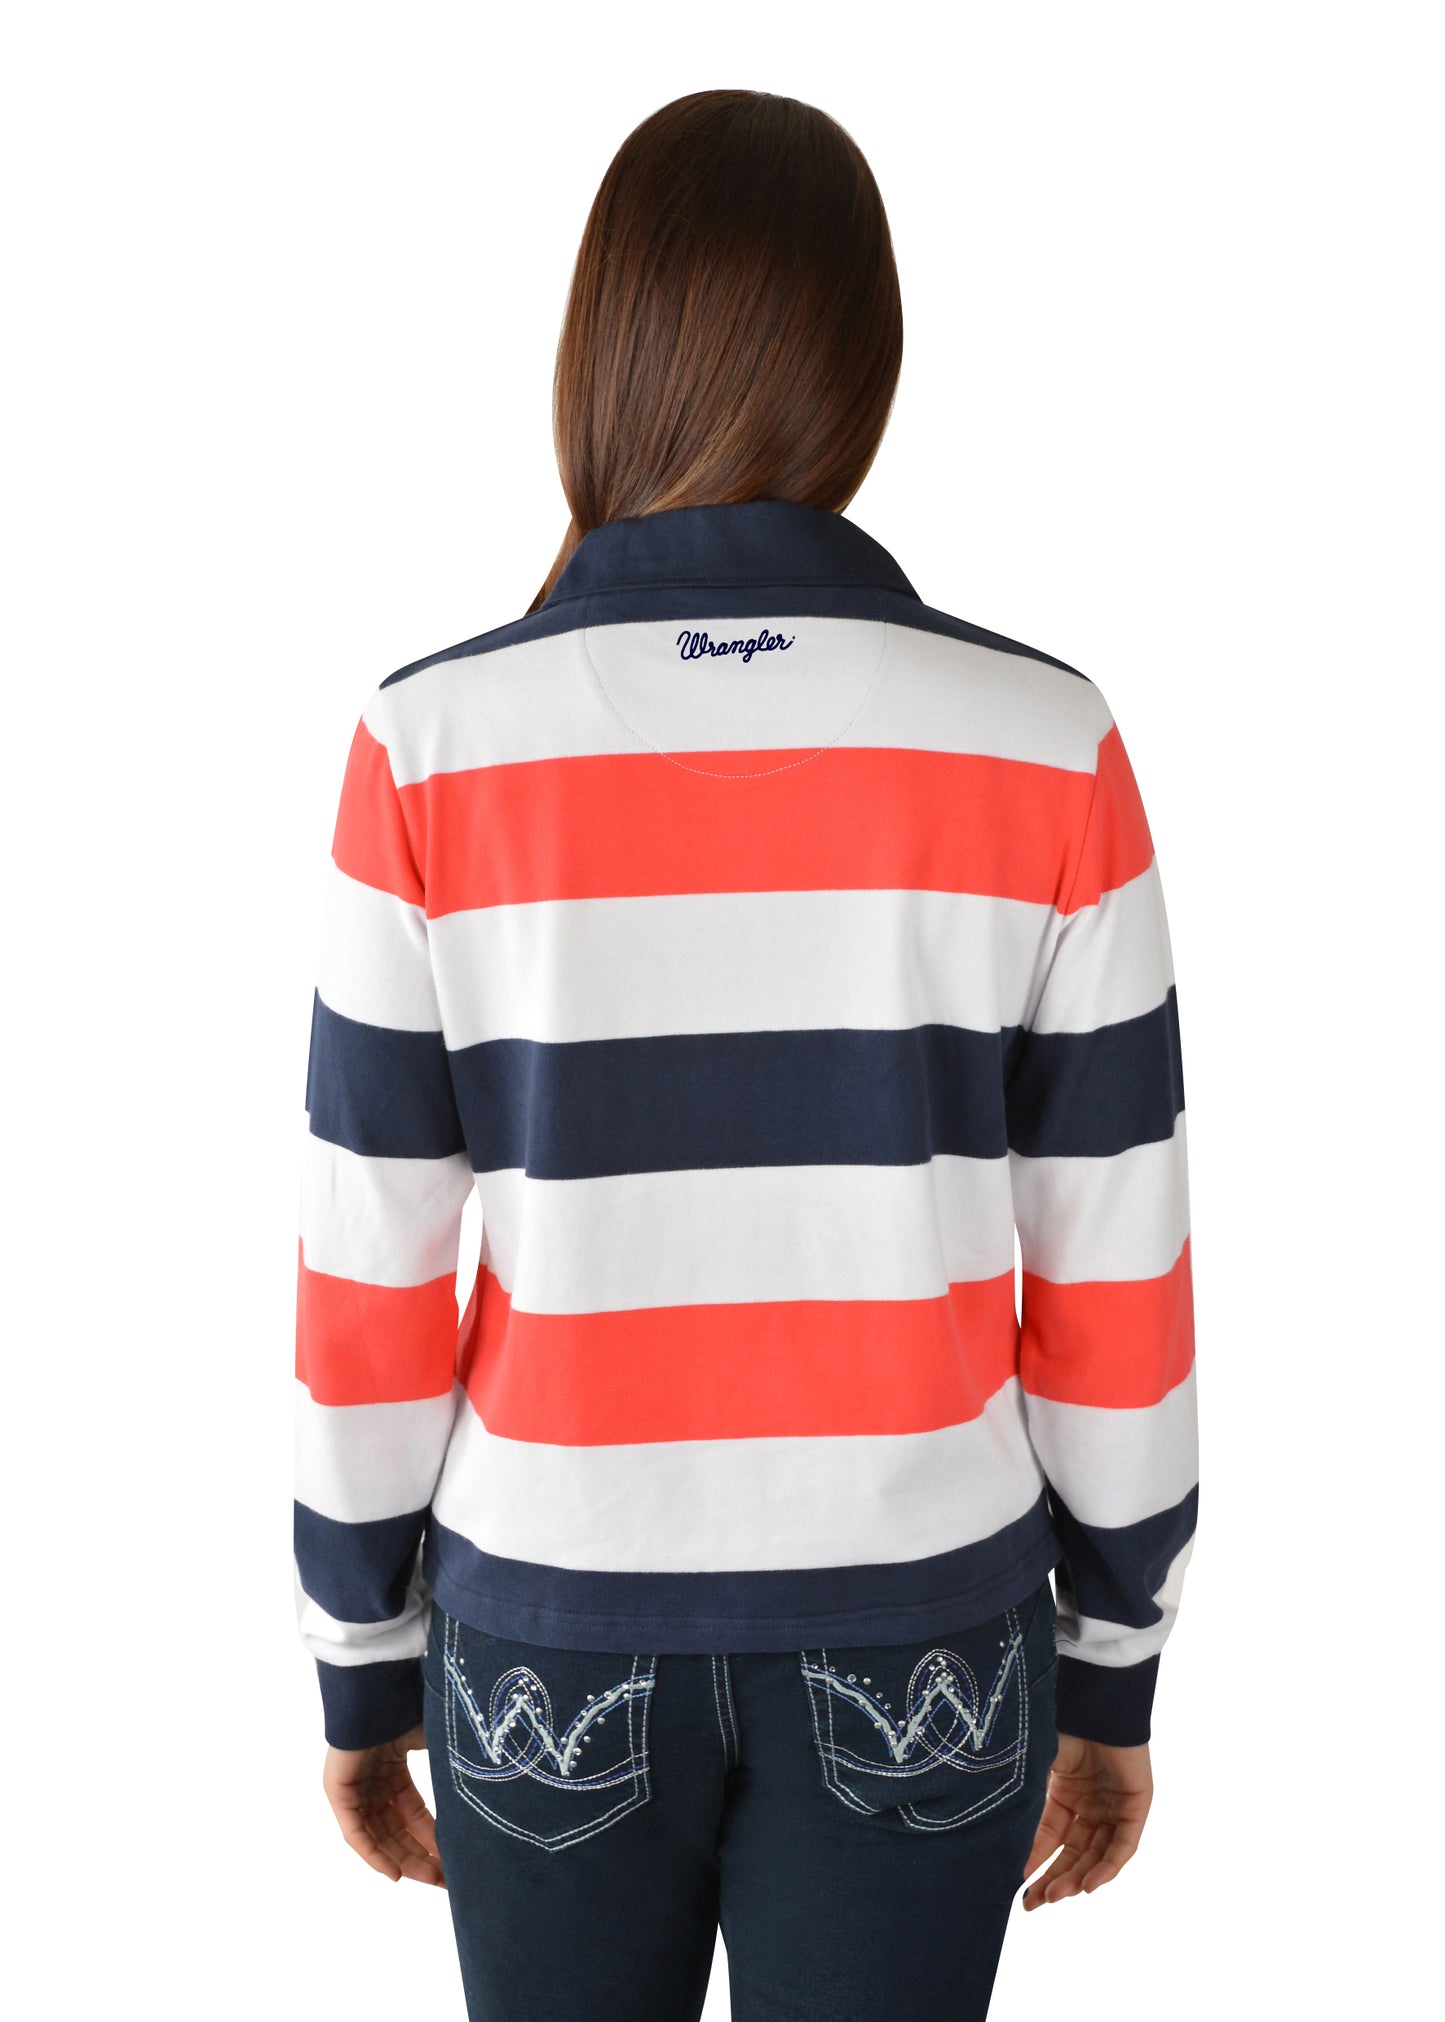 Wrangler Ladies Charlotte Fashion Rugby - Navy/Red/White - X3W2577940